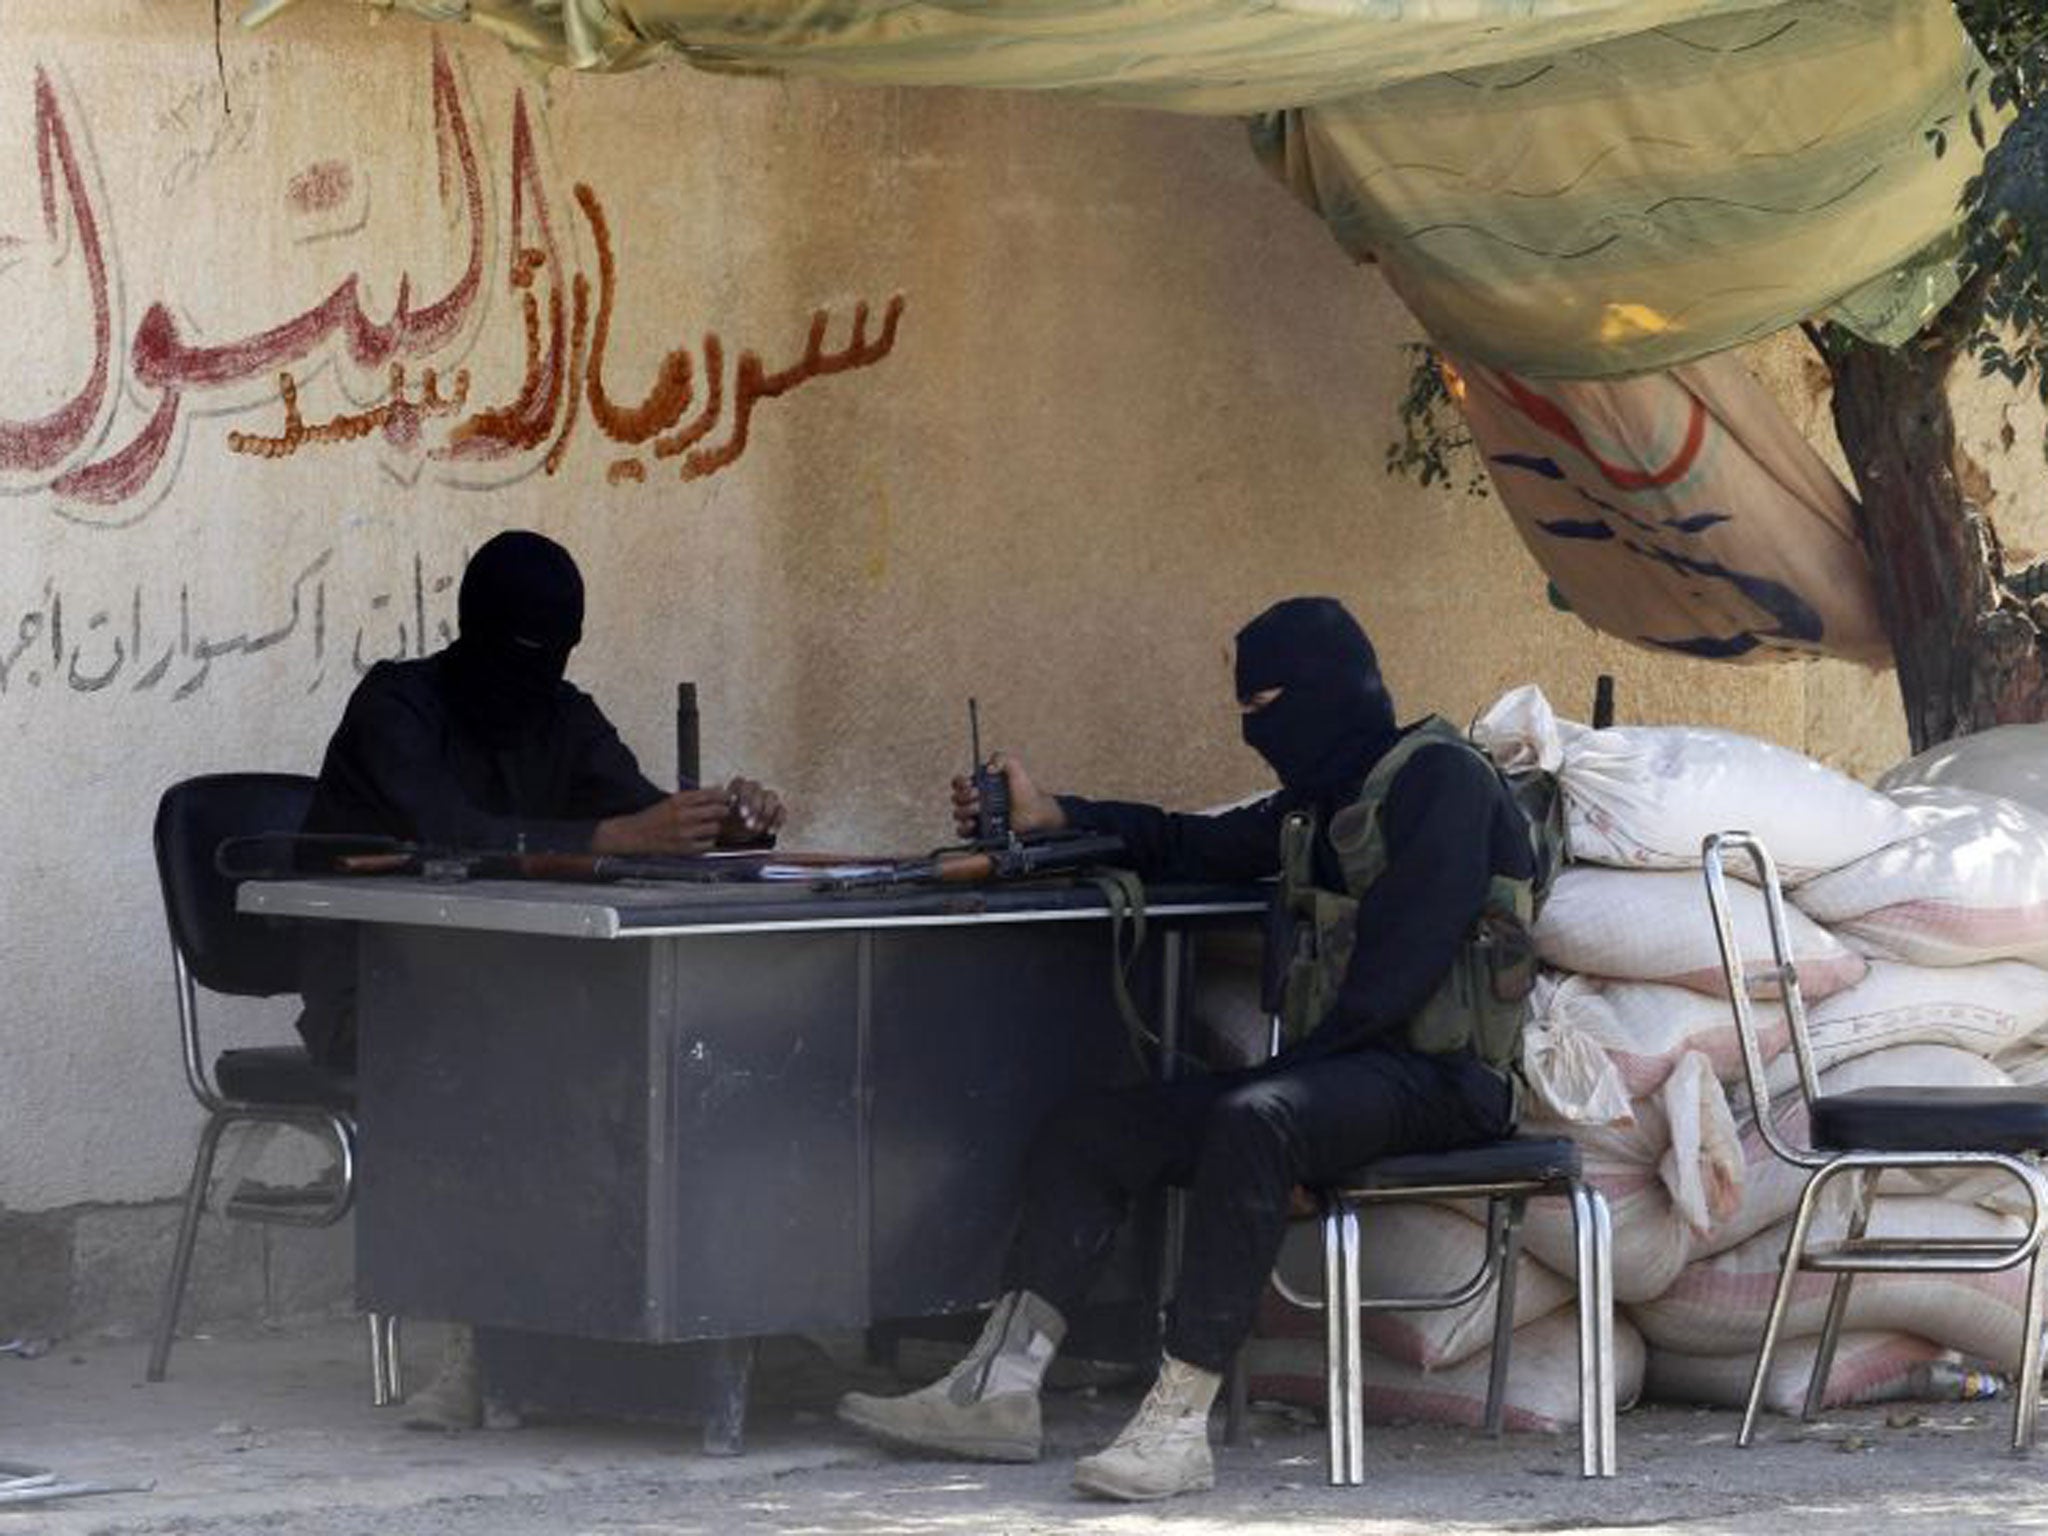 Free Syrian Army fighters sit at their guard post